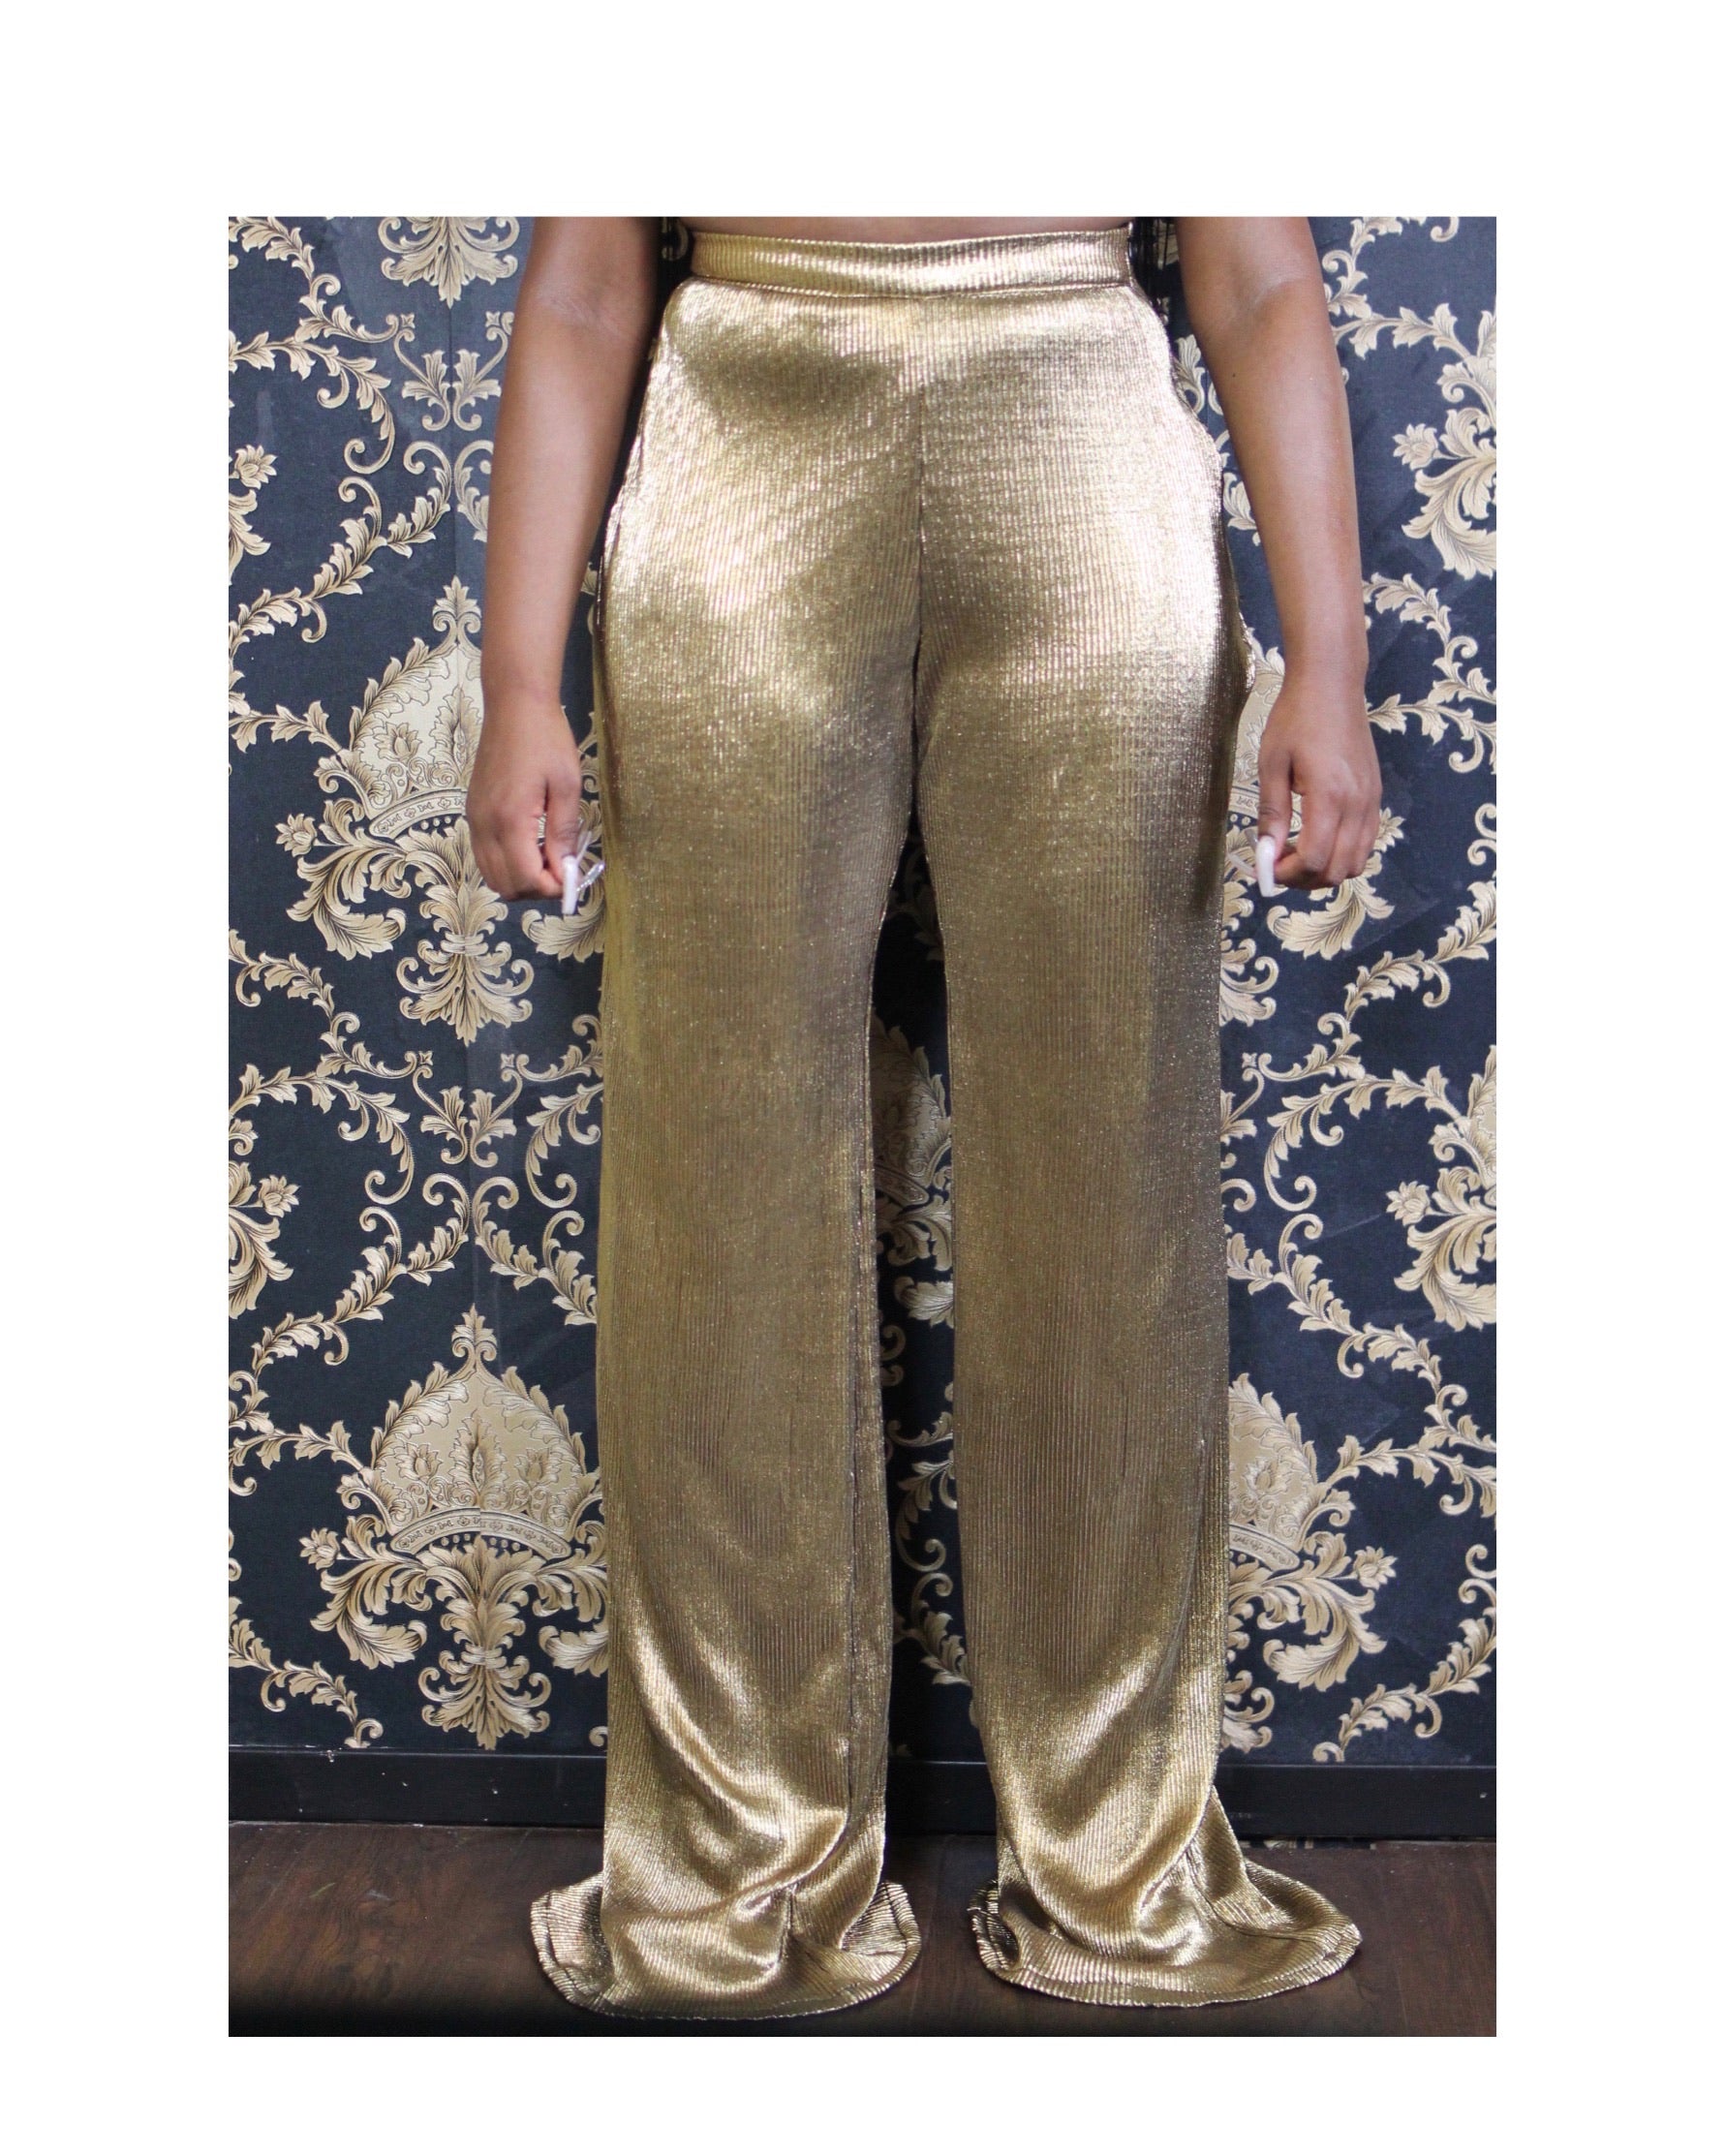 Everlane Cropped Straight Pants In Golden Mustard Size 6 | eBay